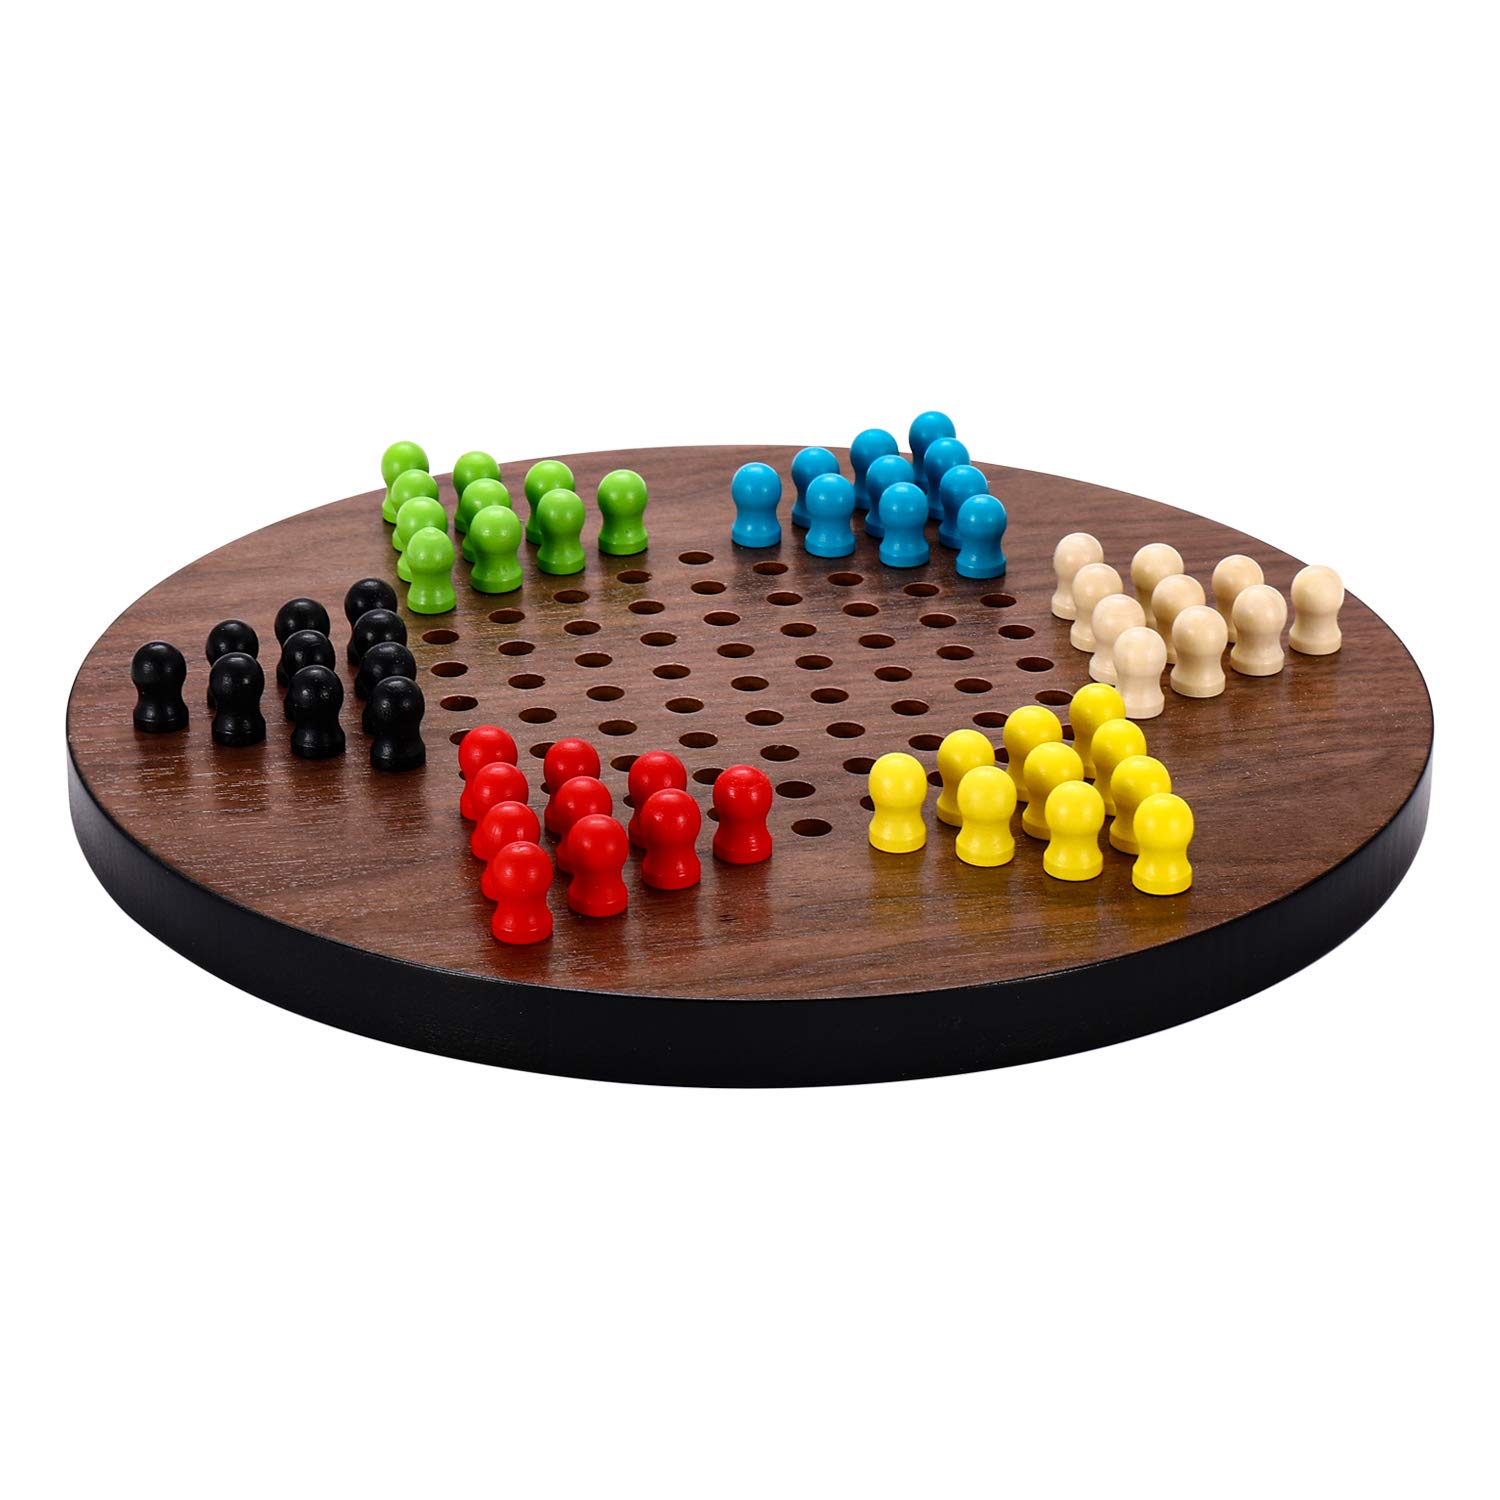 STERLING Games Wooden Chinese Checkers 11.5 Inch Family Board Game for Kids and Adults